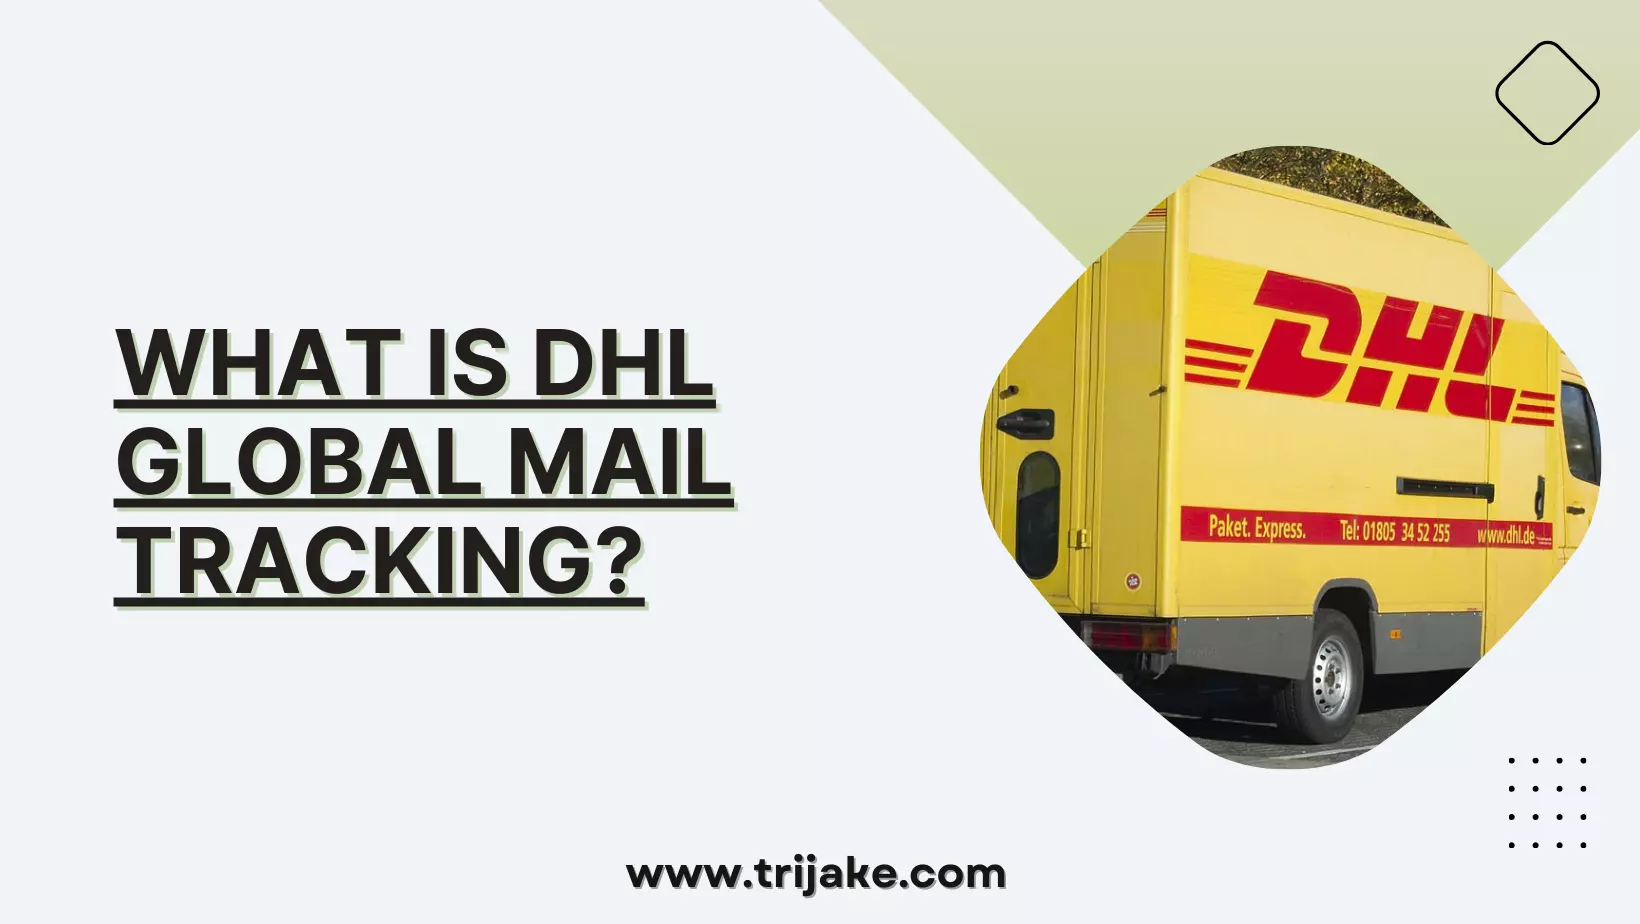 What is Dhl Global Mail Tracking?